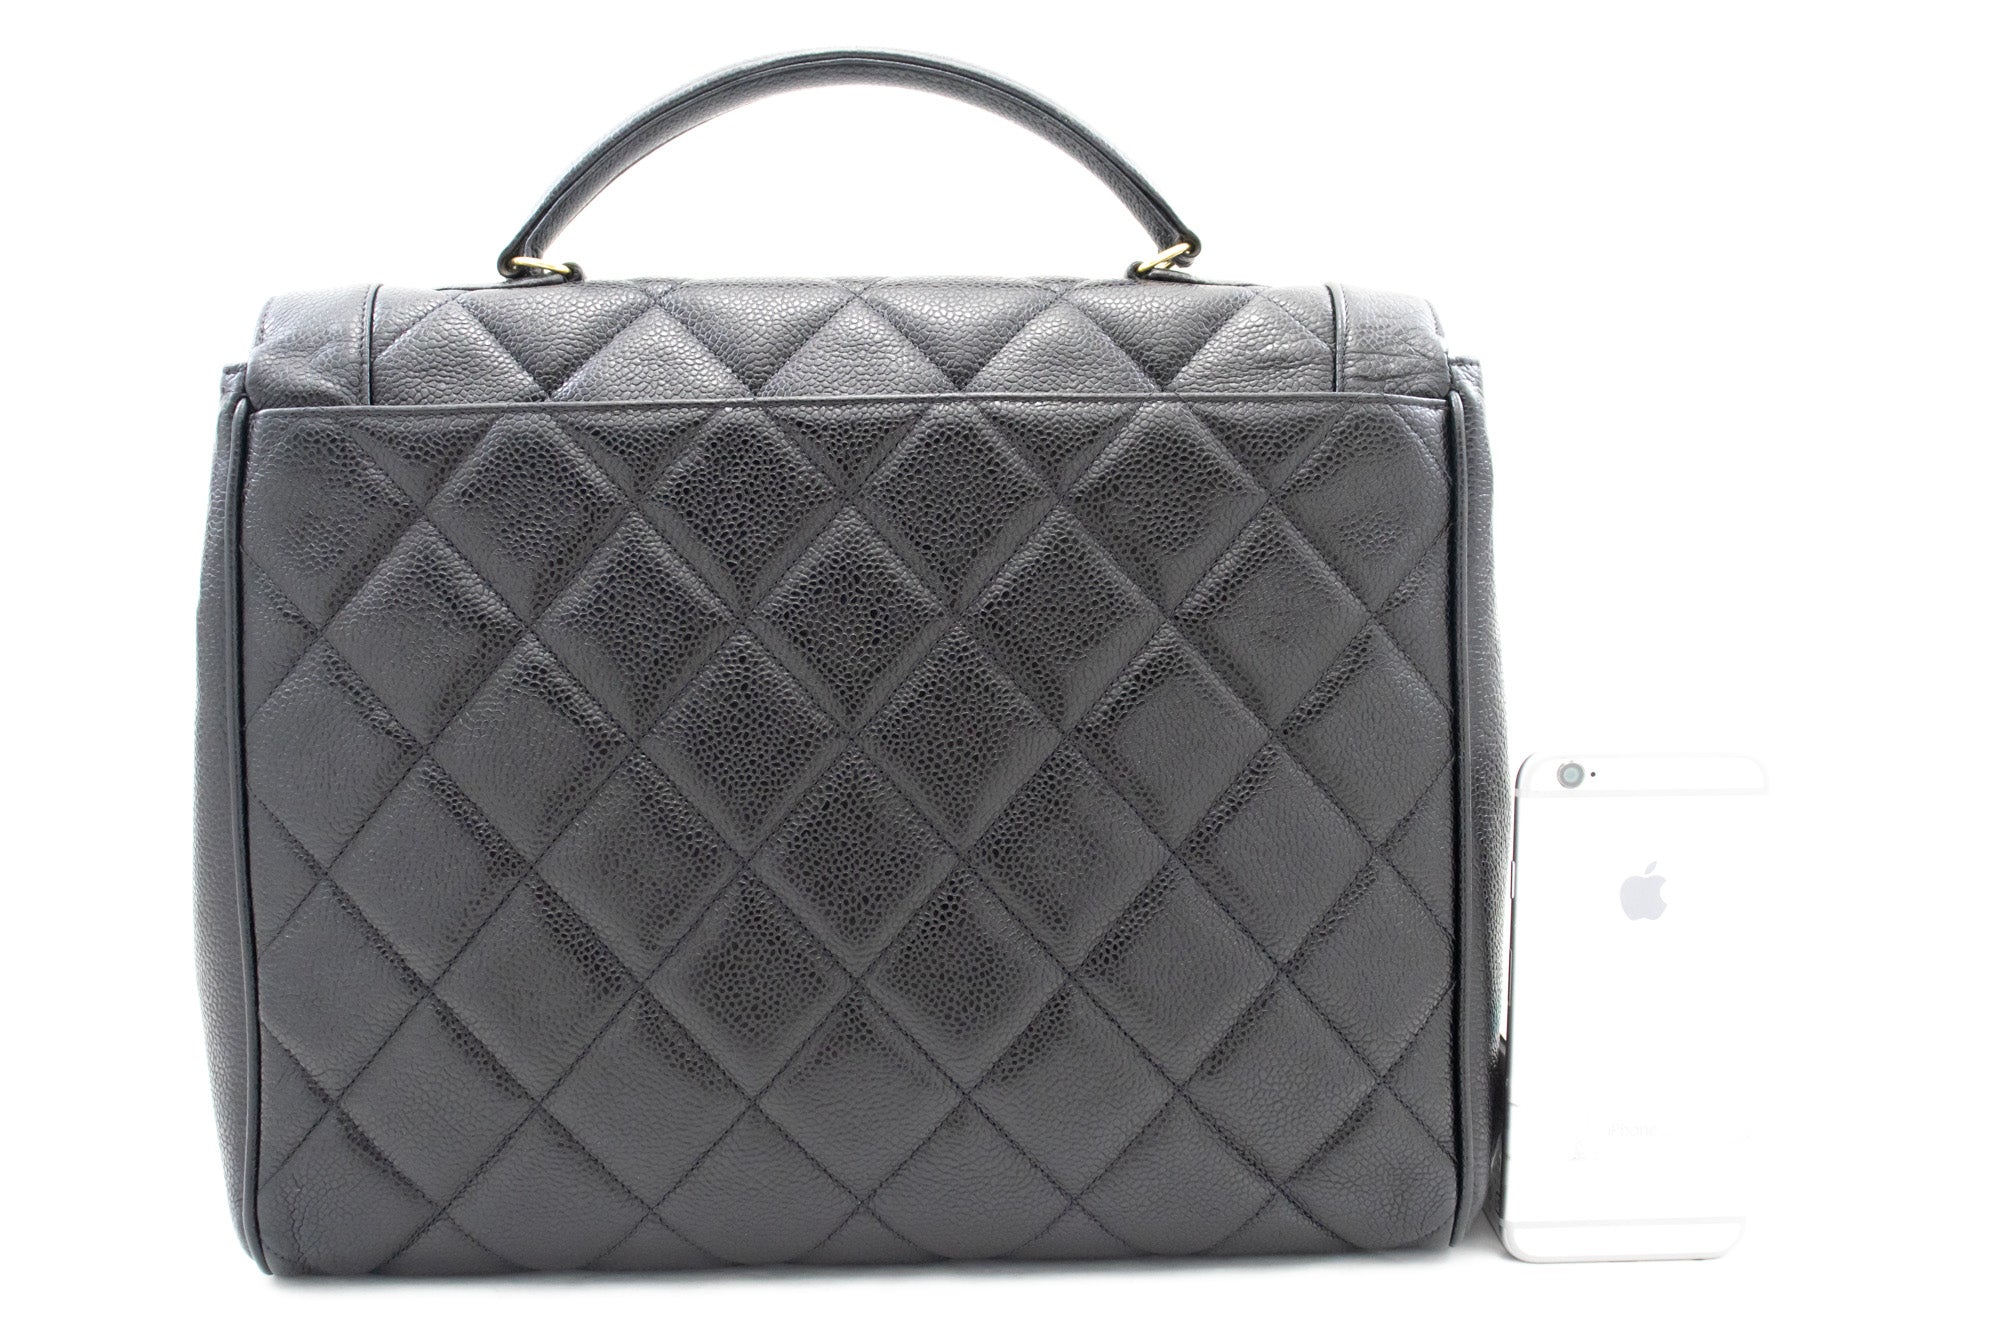 Chanel Grey Quilted Leather Vanity Case Top Handle Bag Chanel